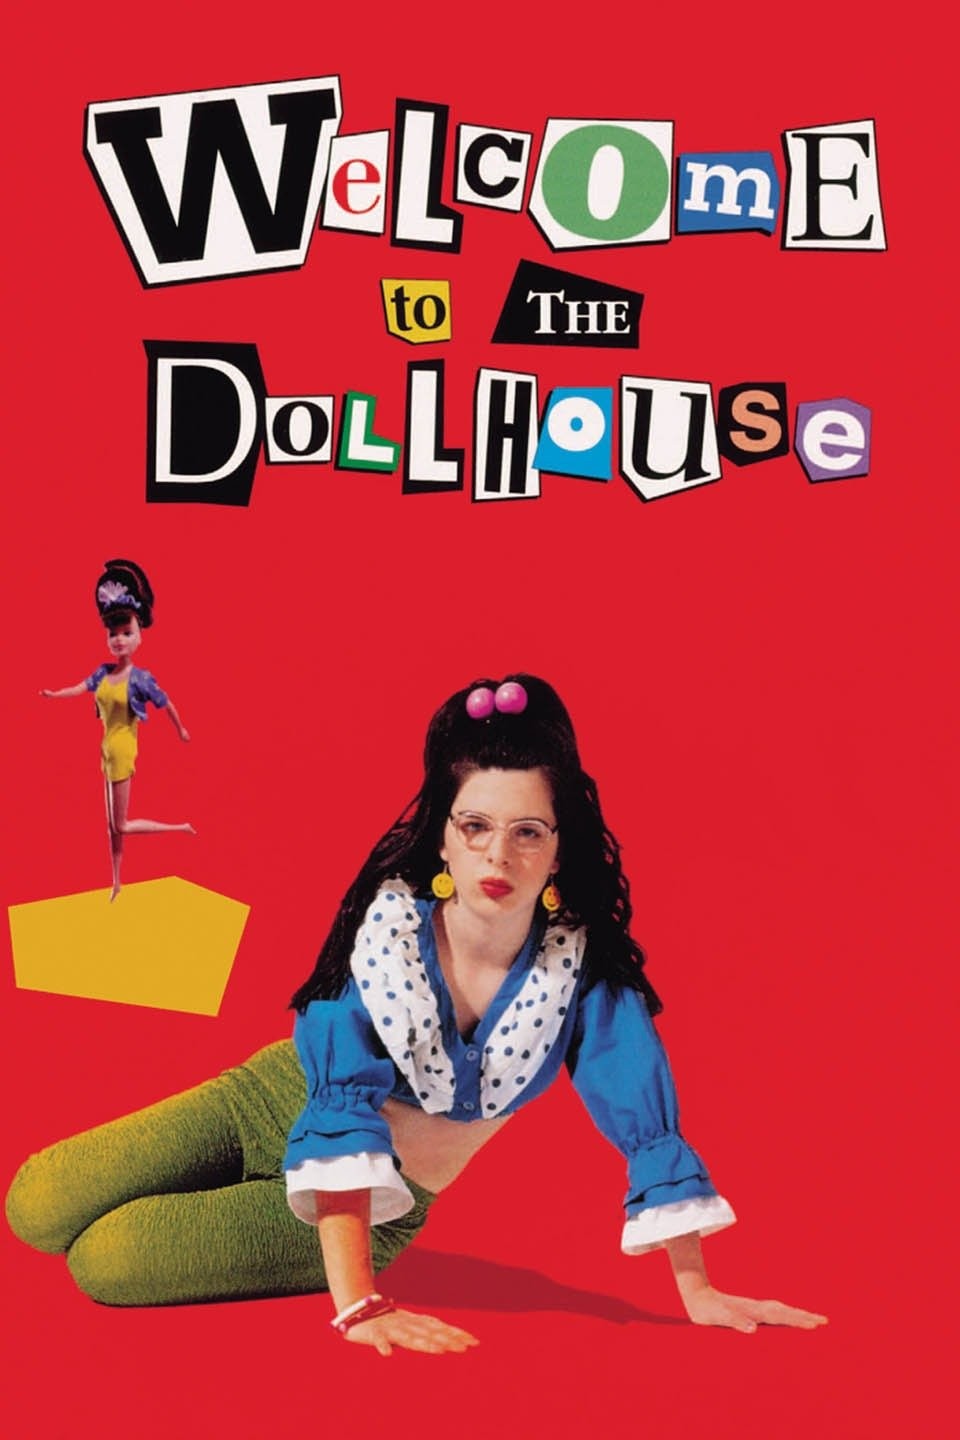 The Big Doll House - Rotten Tomatoes